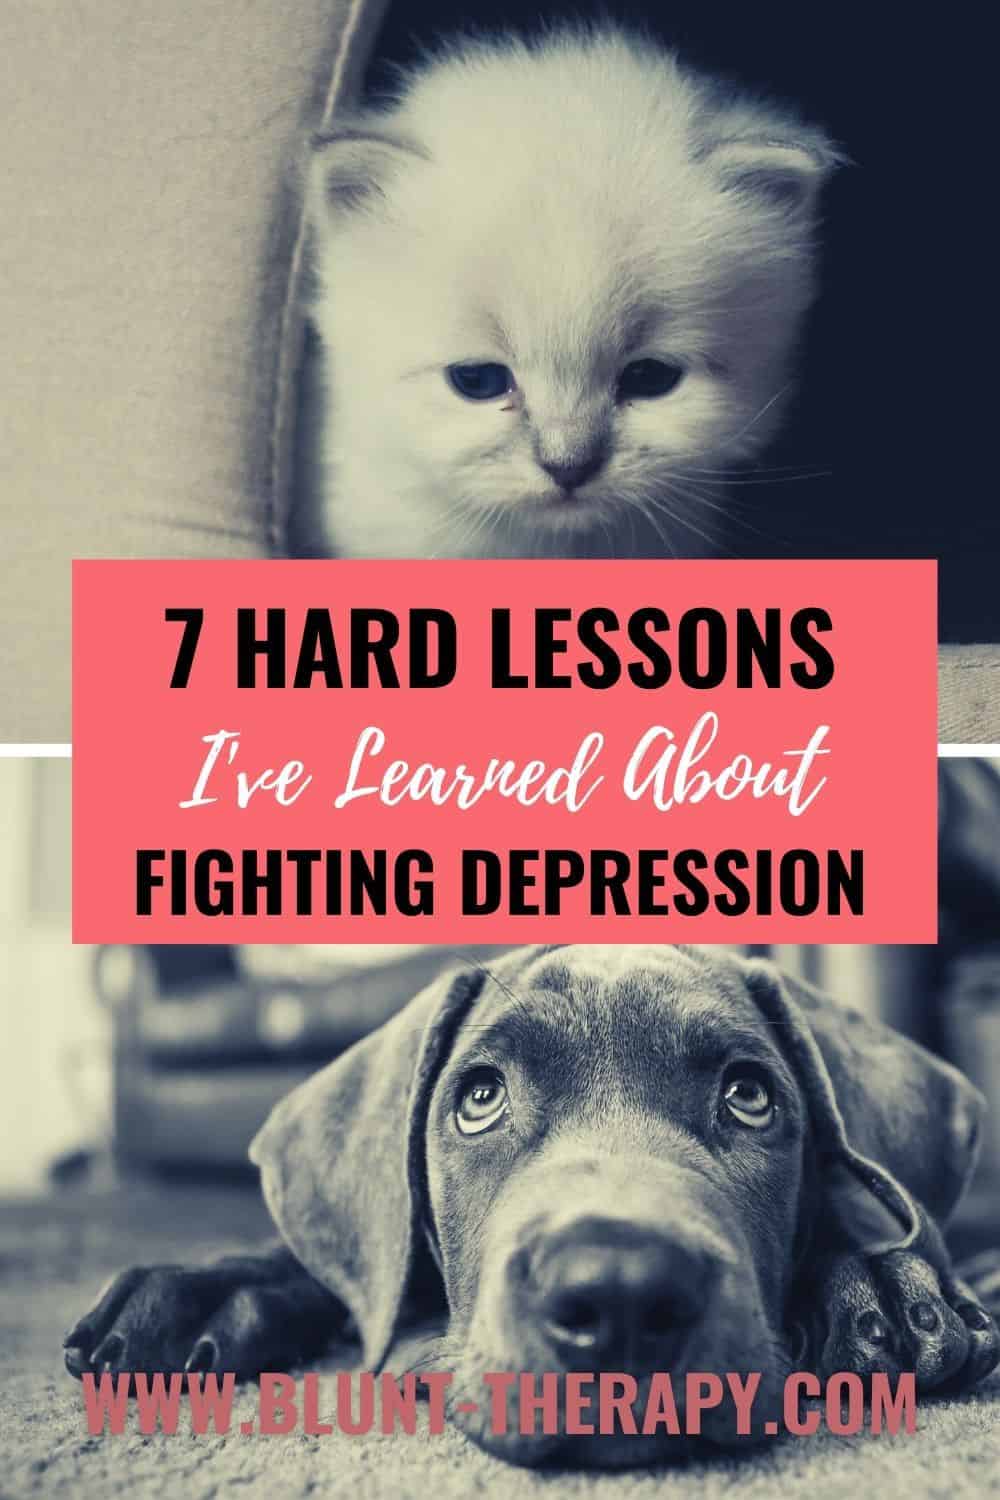 7 Hard lessons I’ve Learned About Fighting Depression